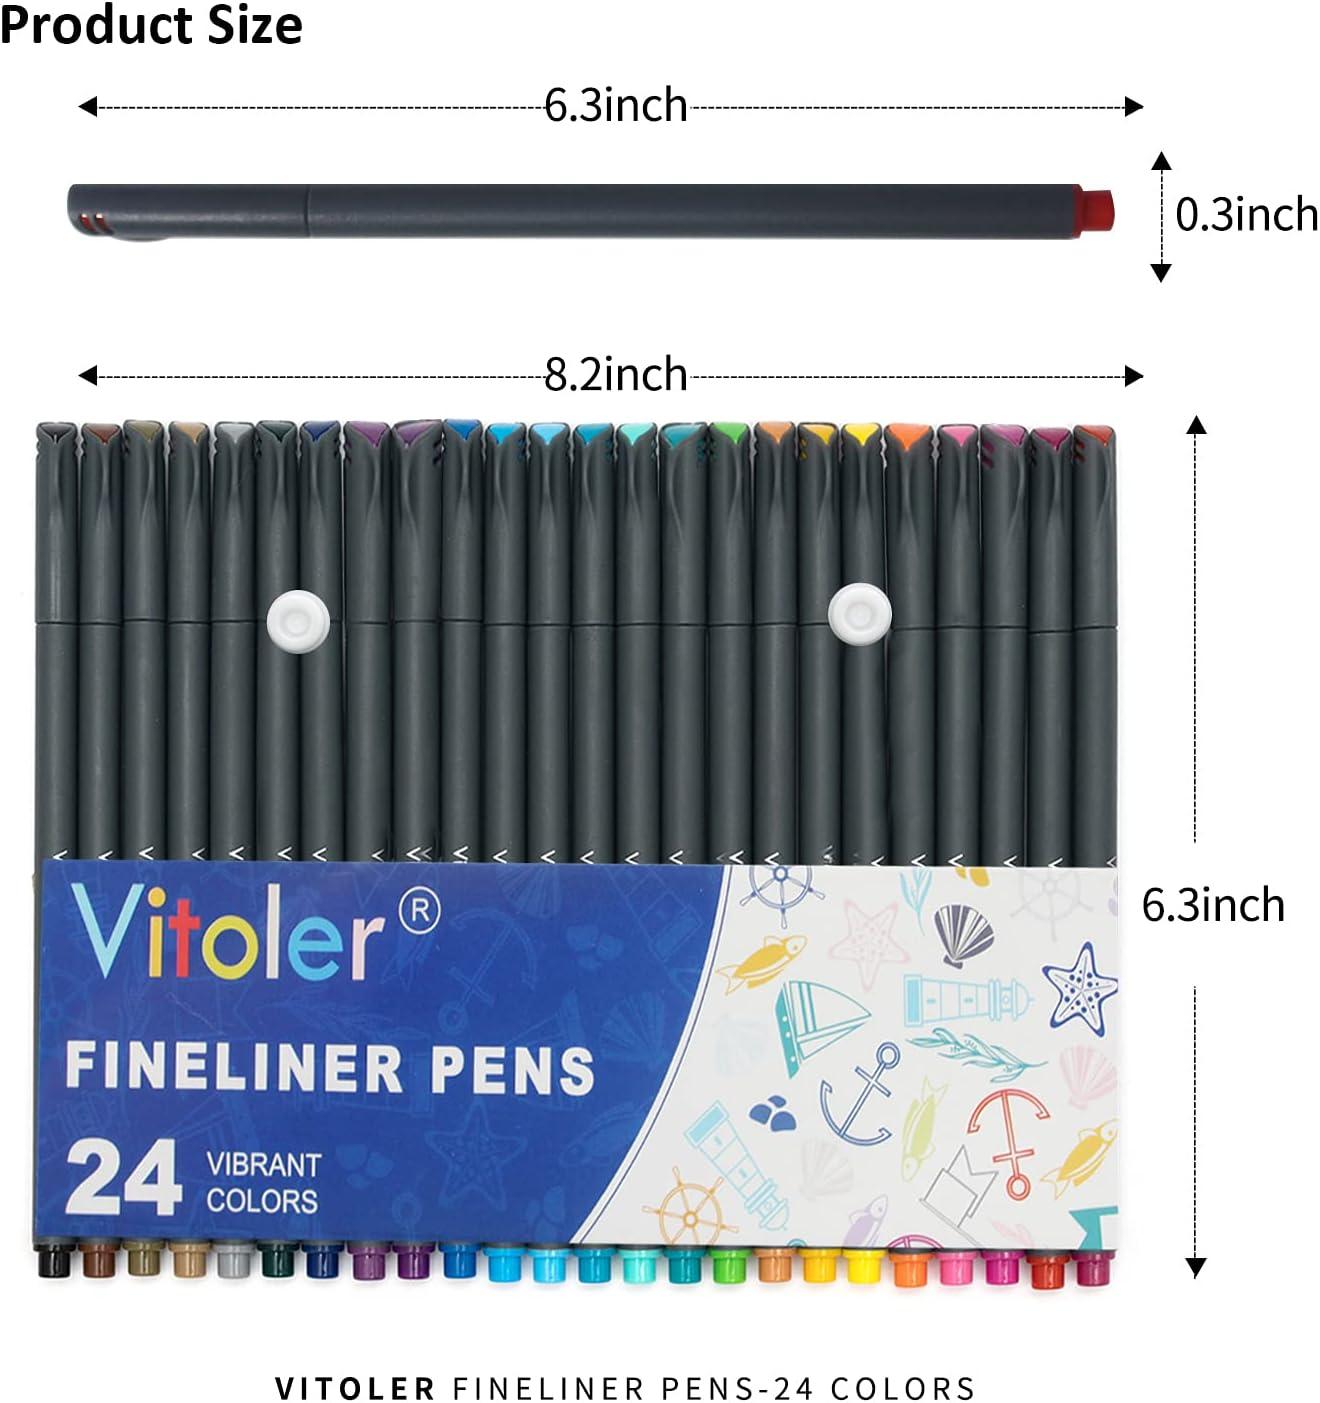 24 Color No Bleed Through Pens Markers Set 0.4 mm Fine Line Colored Sketch  Writing Drawing Pen for Bullet Journal Planner Note Taking and Coloring